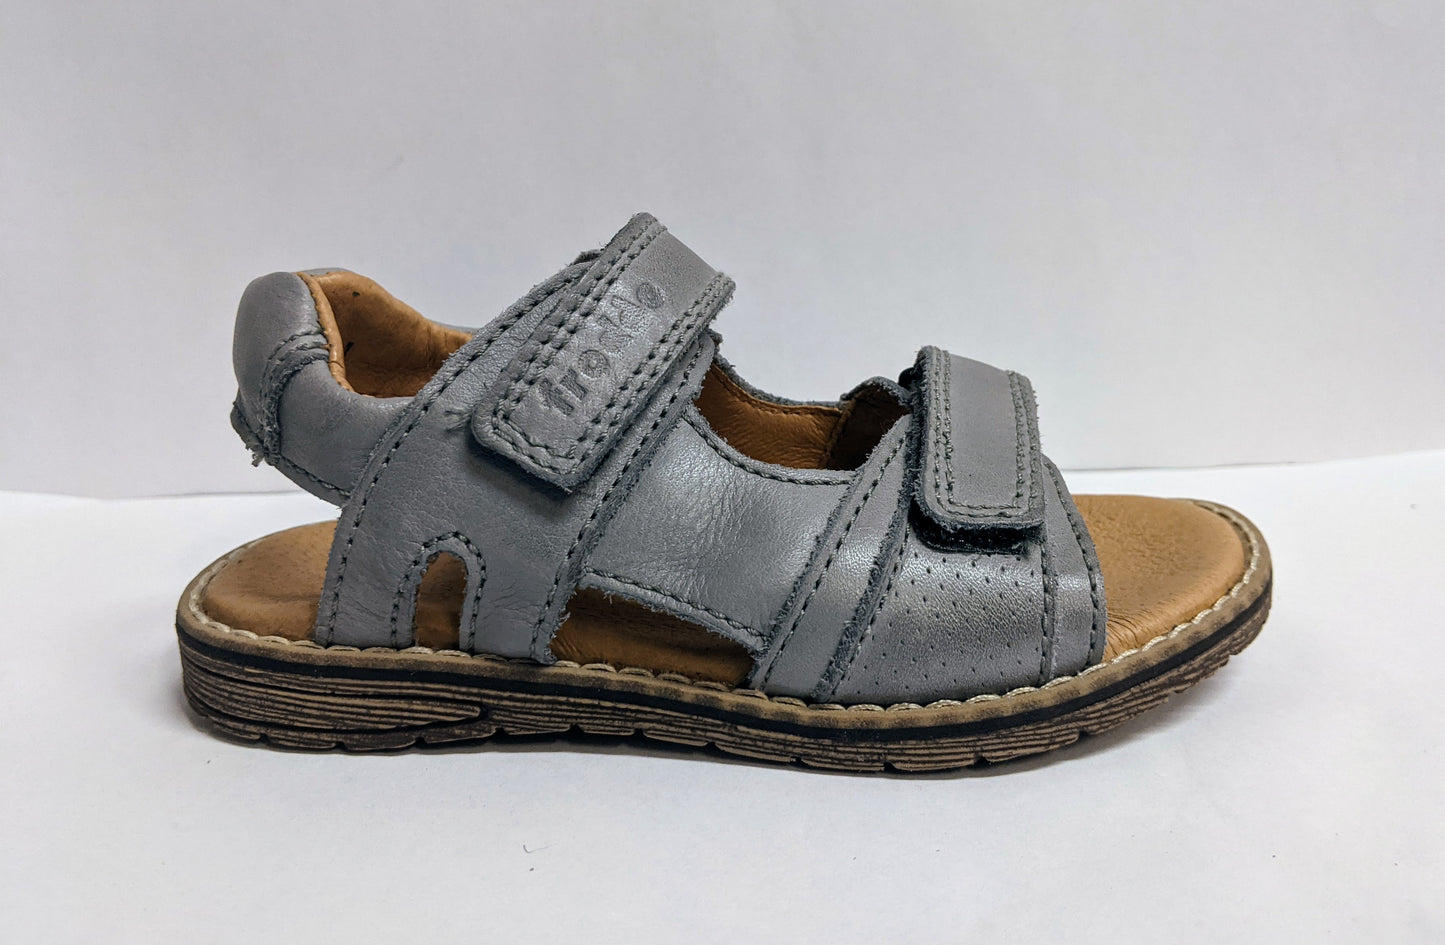 A boys open toe sandal by Froddo, style G3150142, in grey leather with velcro fastening. Right side view.